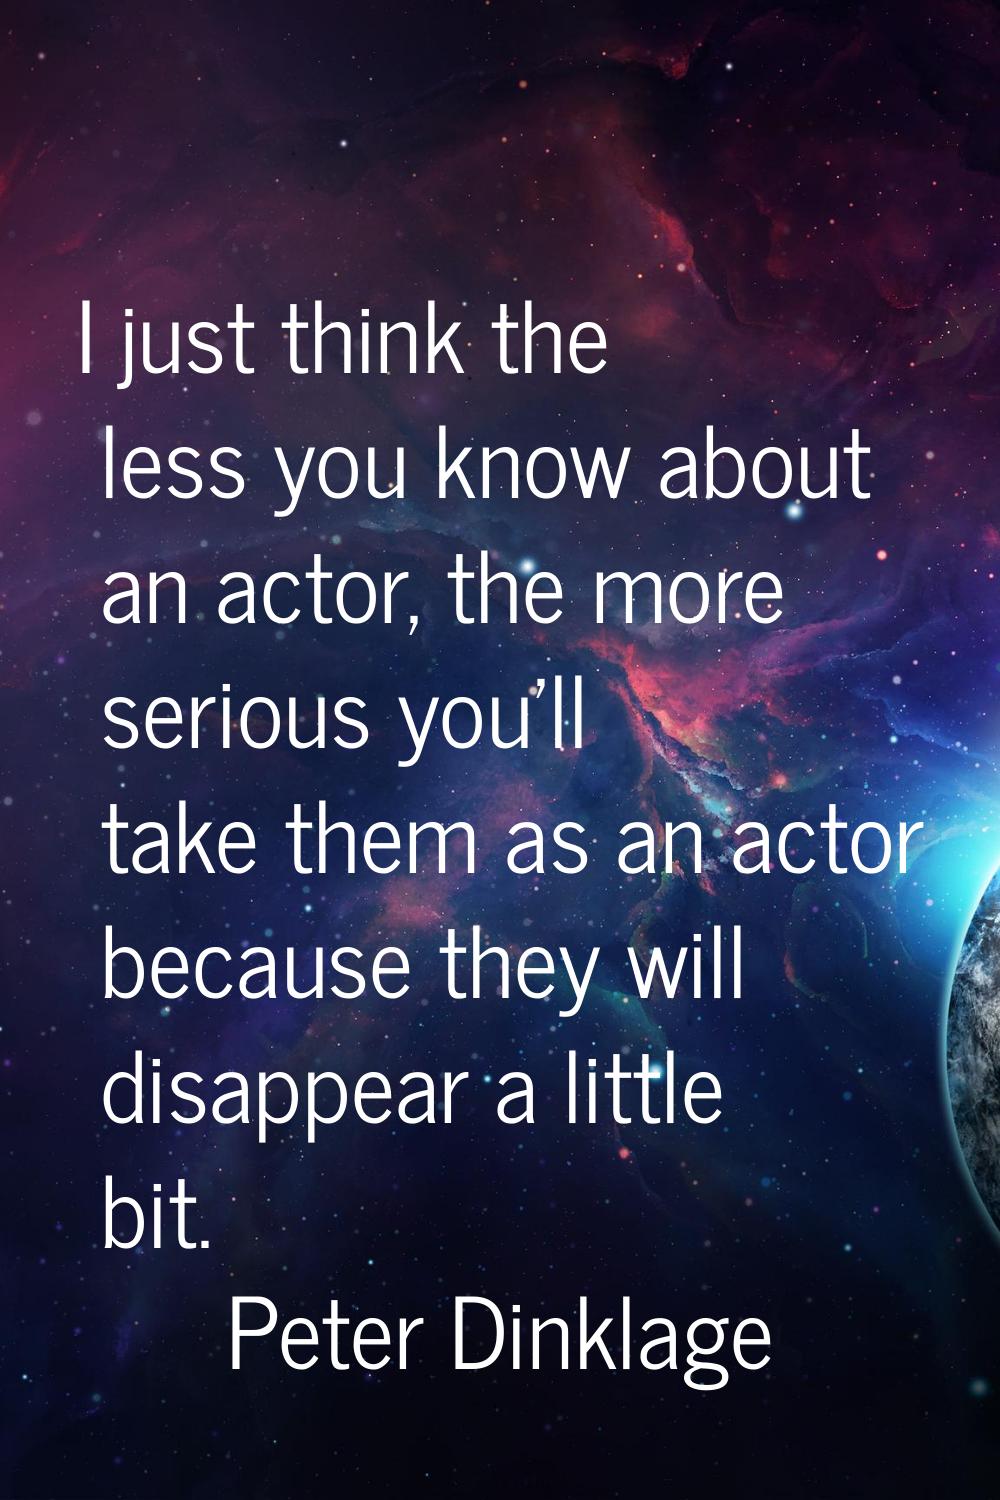 I just think the less you know about an actor, the more serious you'll take them as an actor becaus